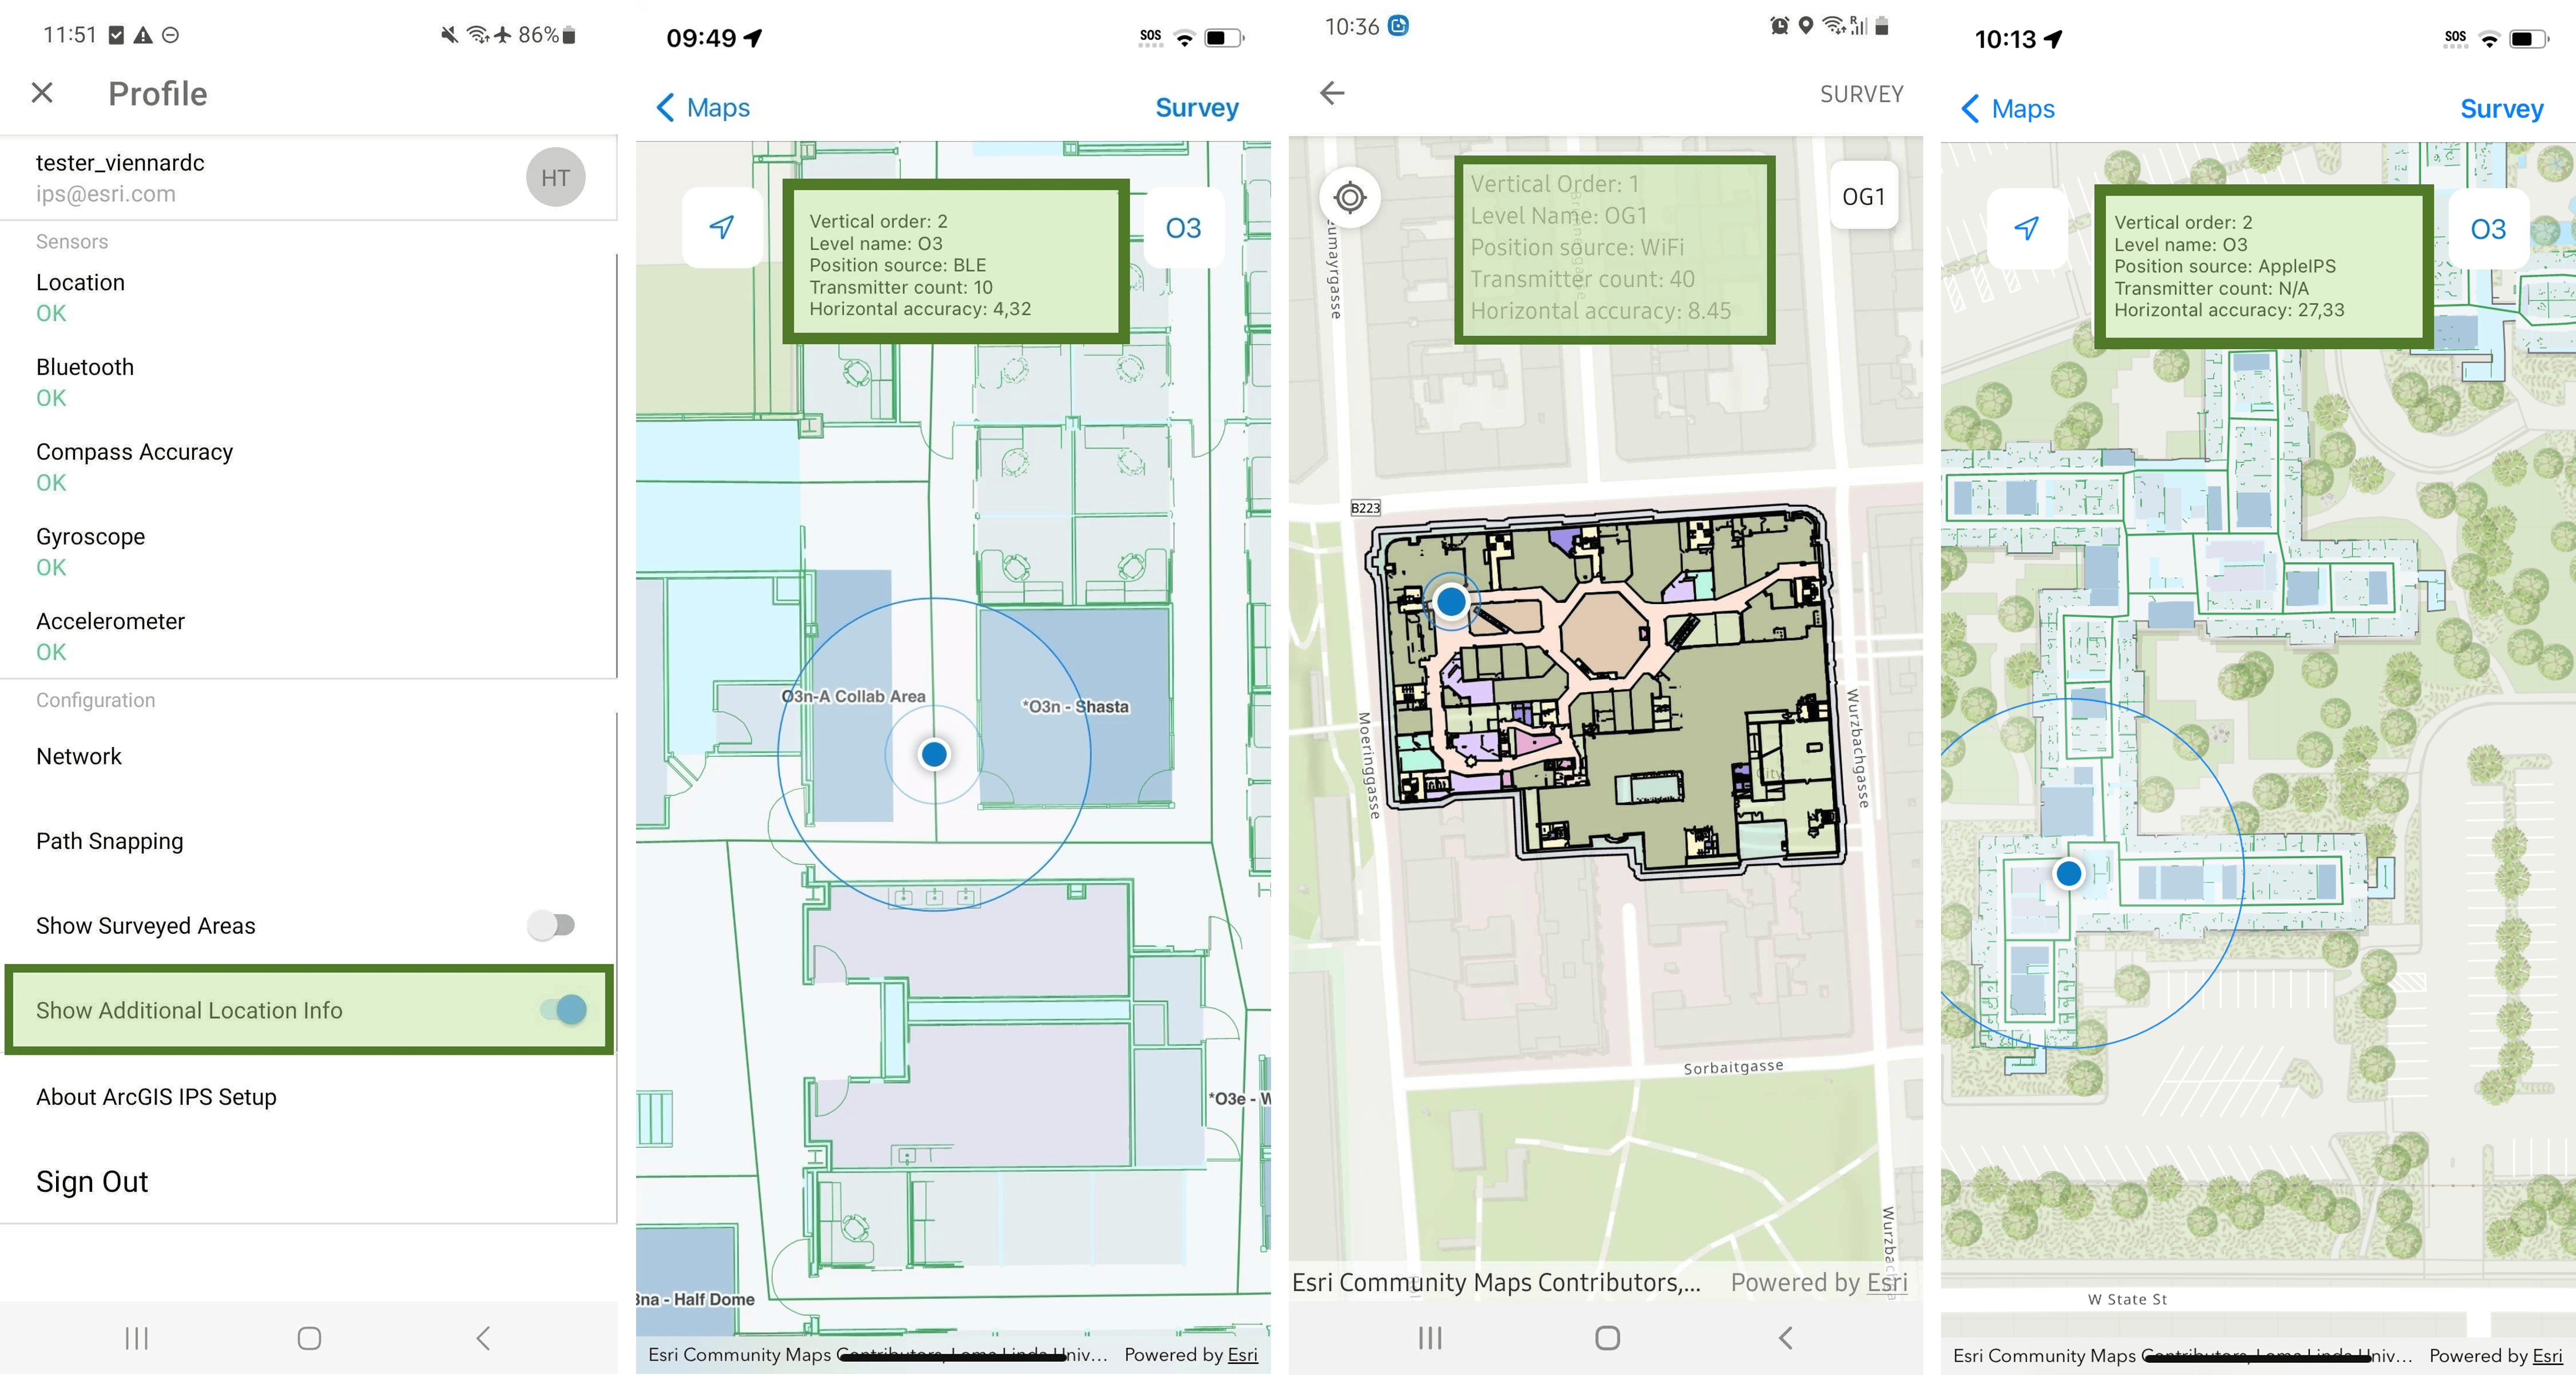 fpur screenshots of the ArcGIS IPS Setup app showing an indoor map of a building with the blue dot